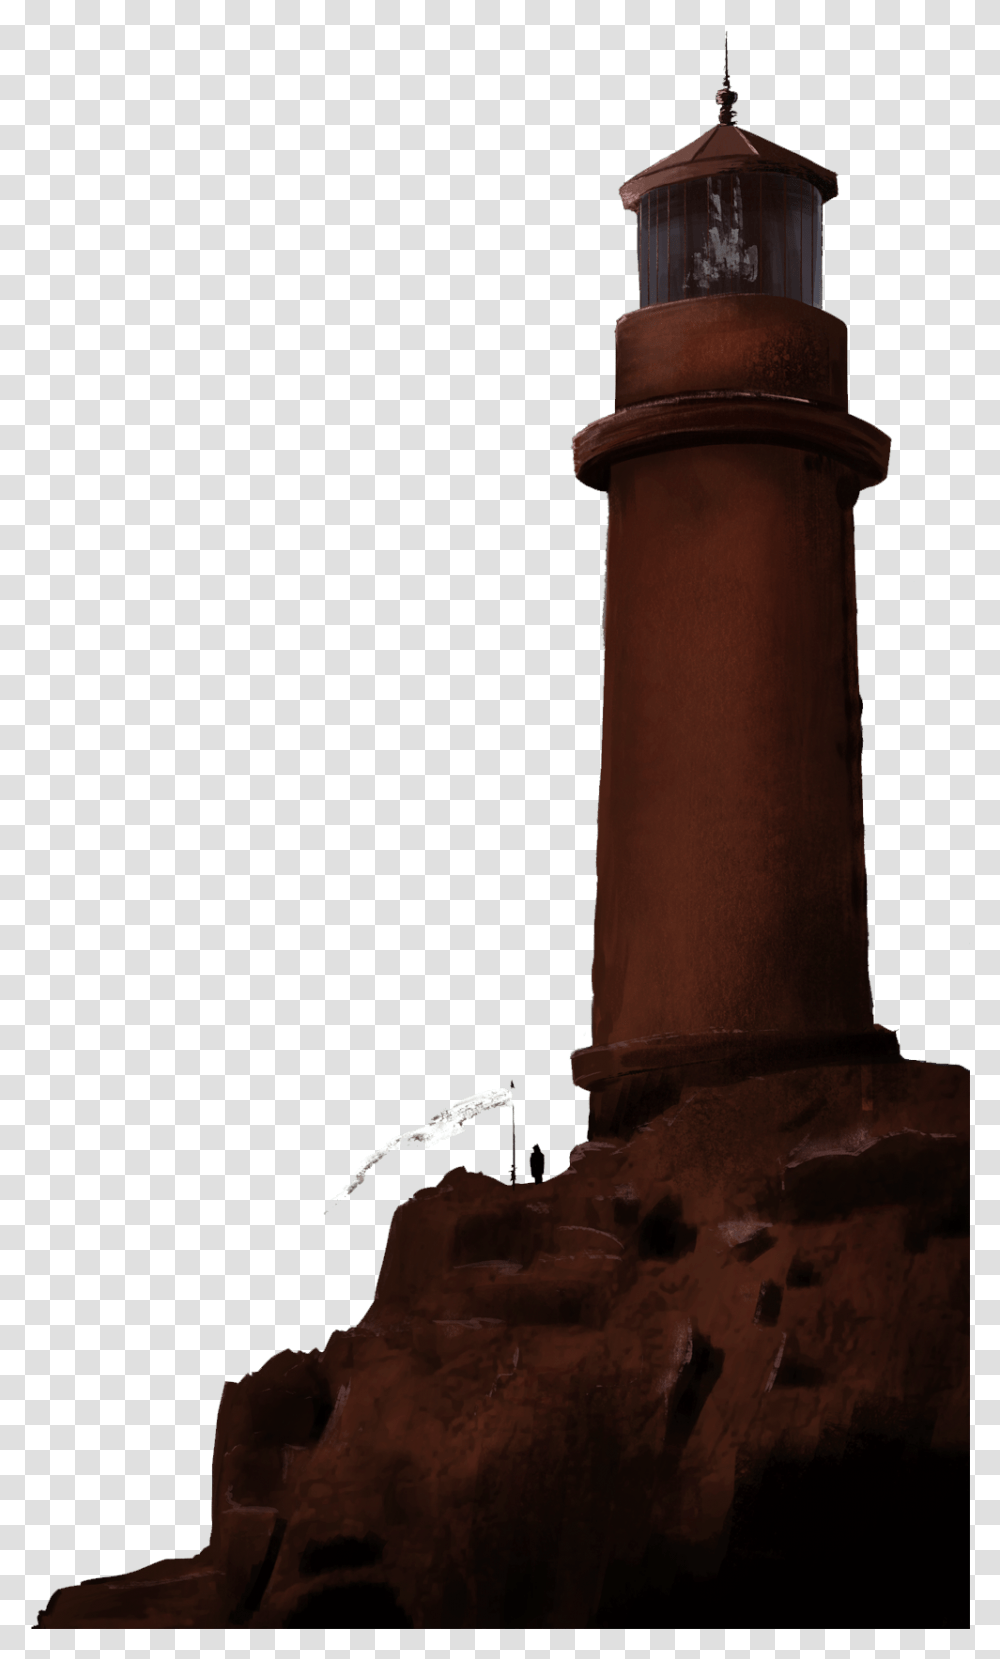 Lighthouse Images Free Download Portable Network Graphics, Building, Brick, Architecture, Tower Transparent Png